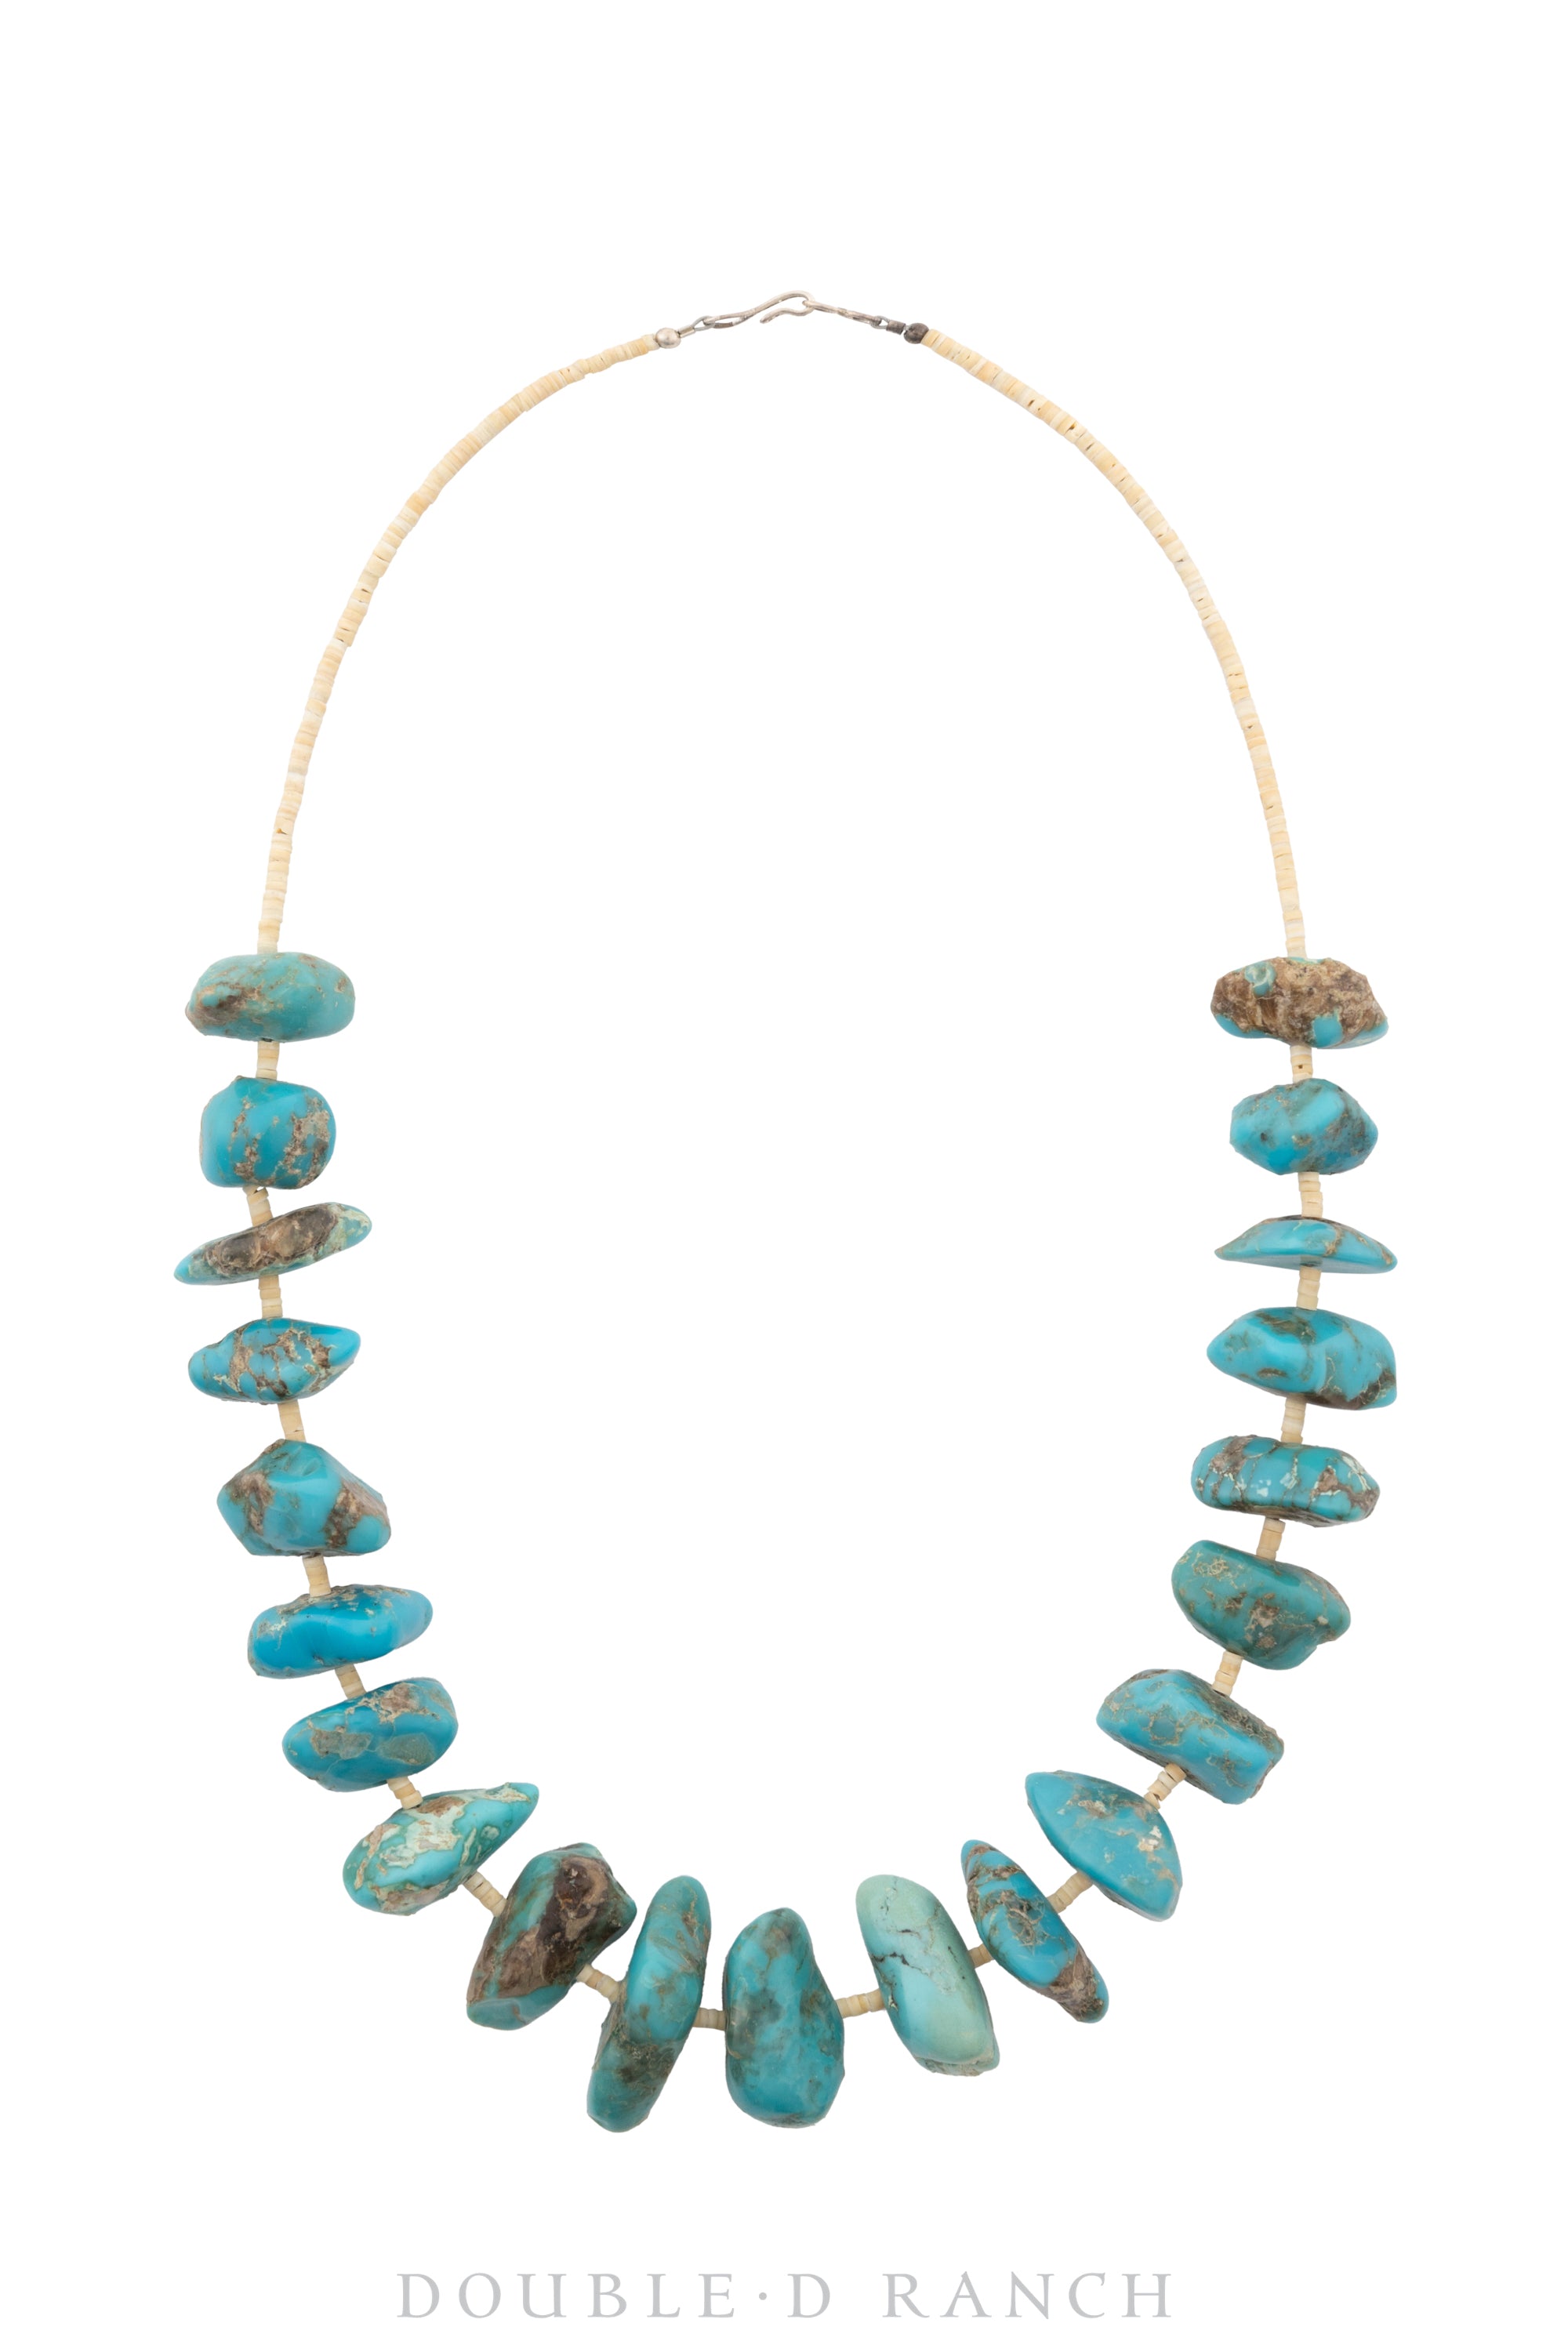 Necklace, Natural Stone, Turquoise, Nuggets, Vintage ‘70s, 1702